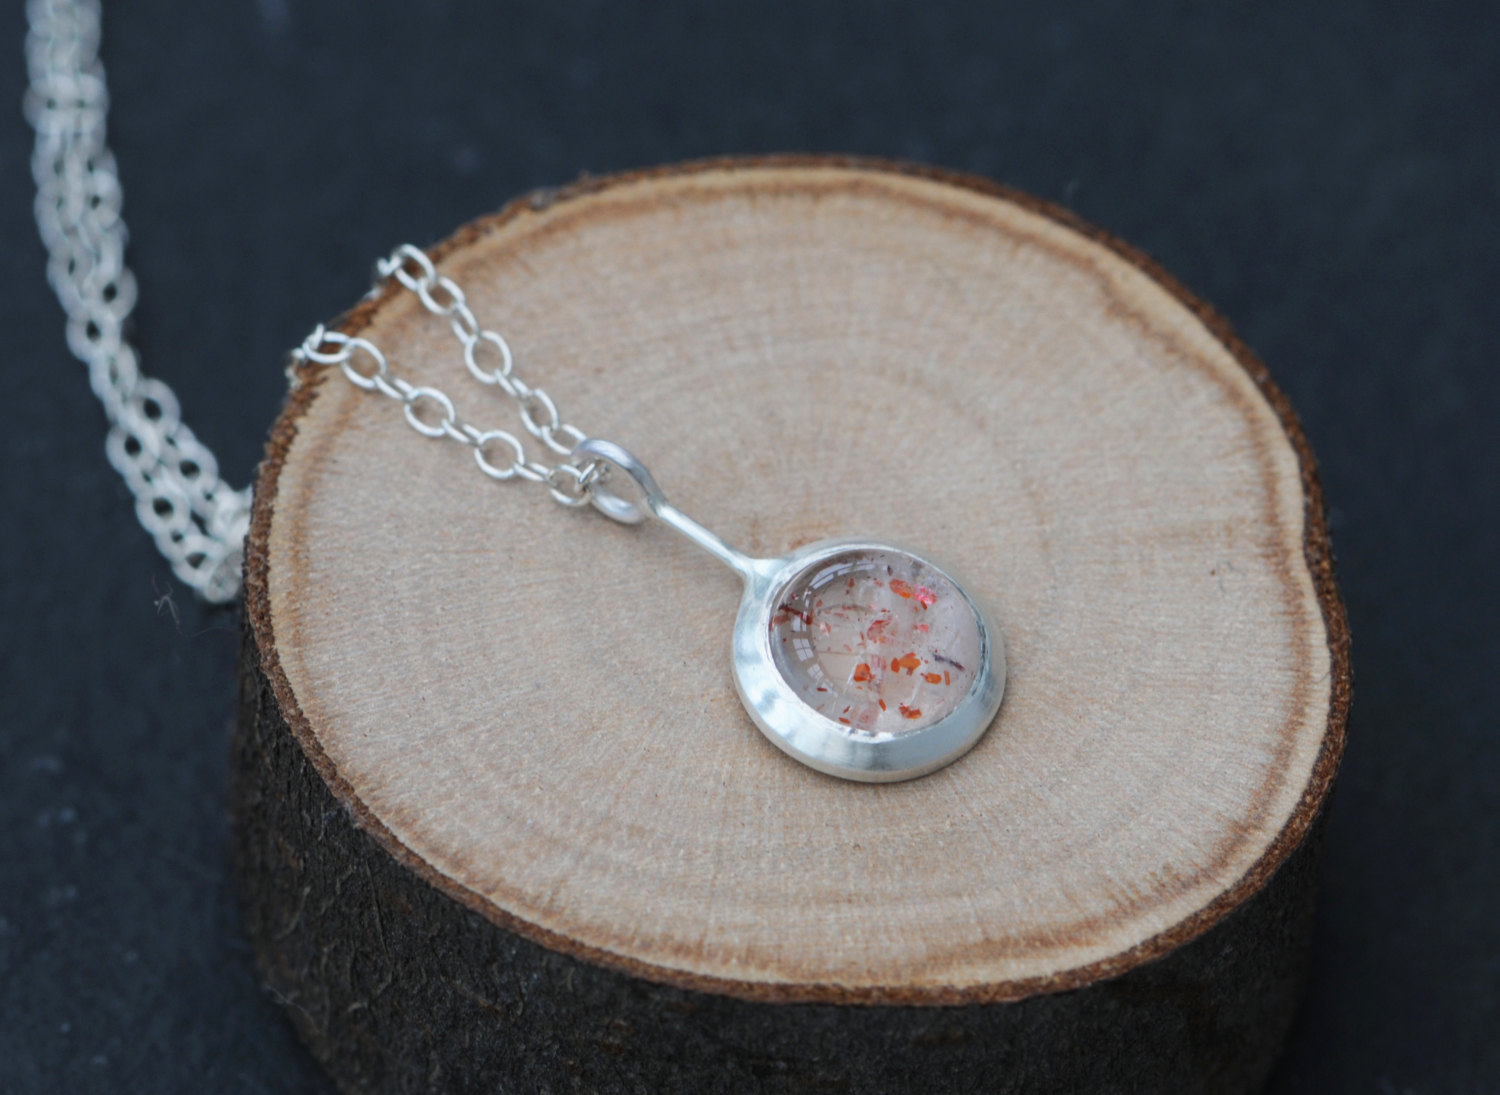 Strawberry quartz 'Lollipop' necklace, set in sterling silver. Strawberry quartz stone is 8mm across and the pendant is 10mm across. By William White